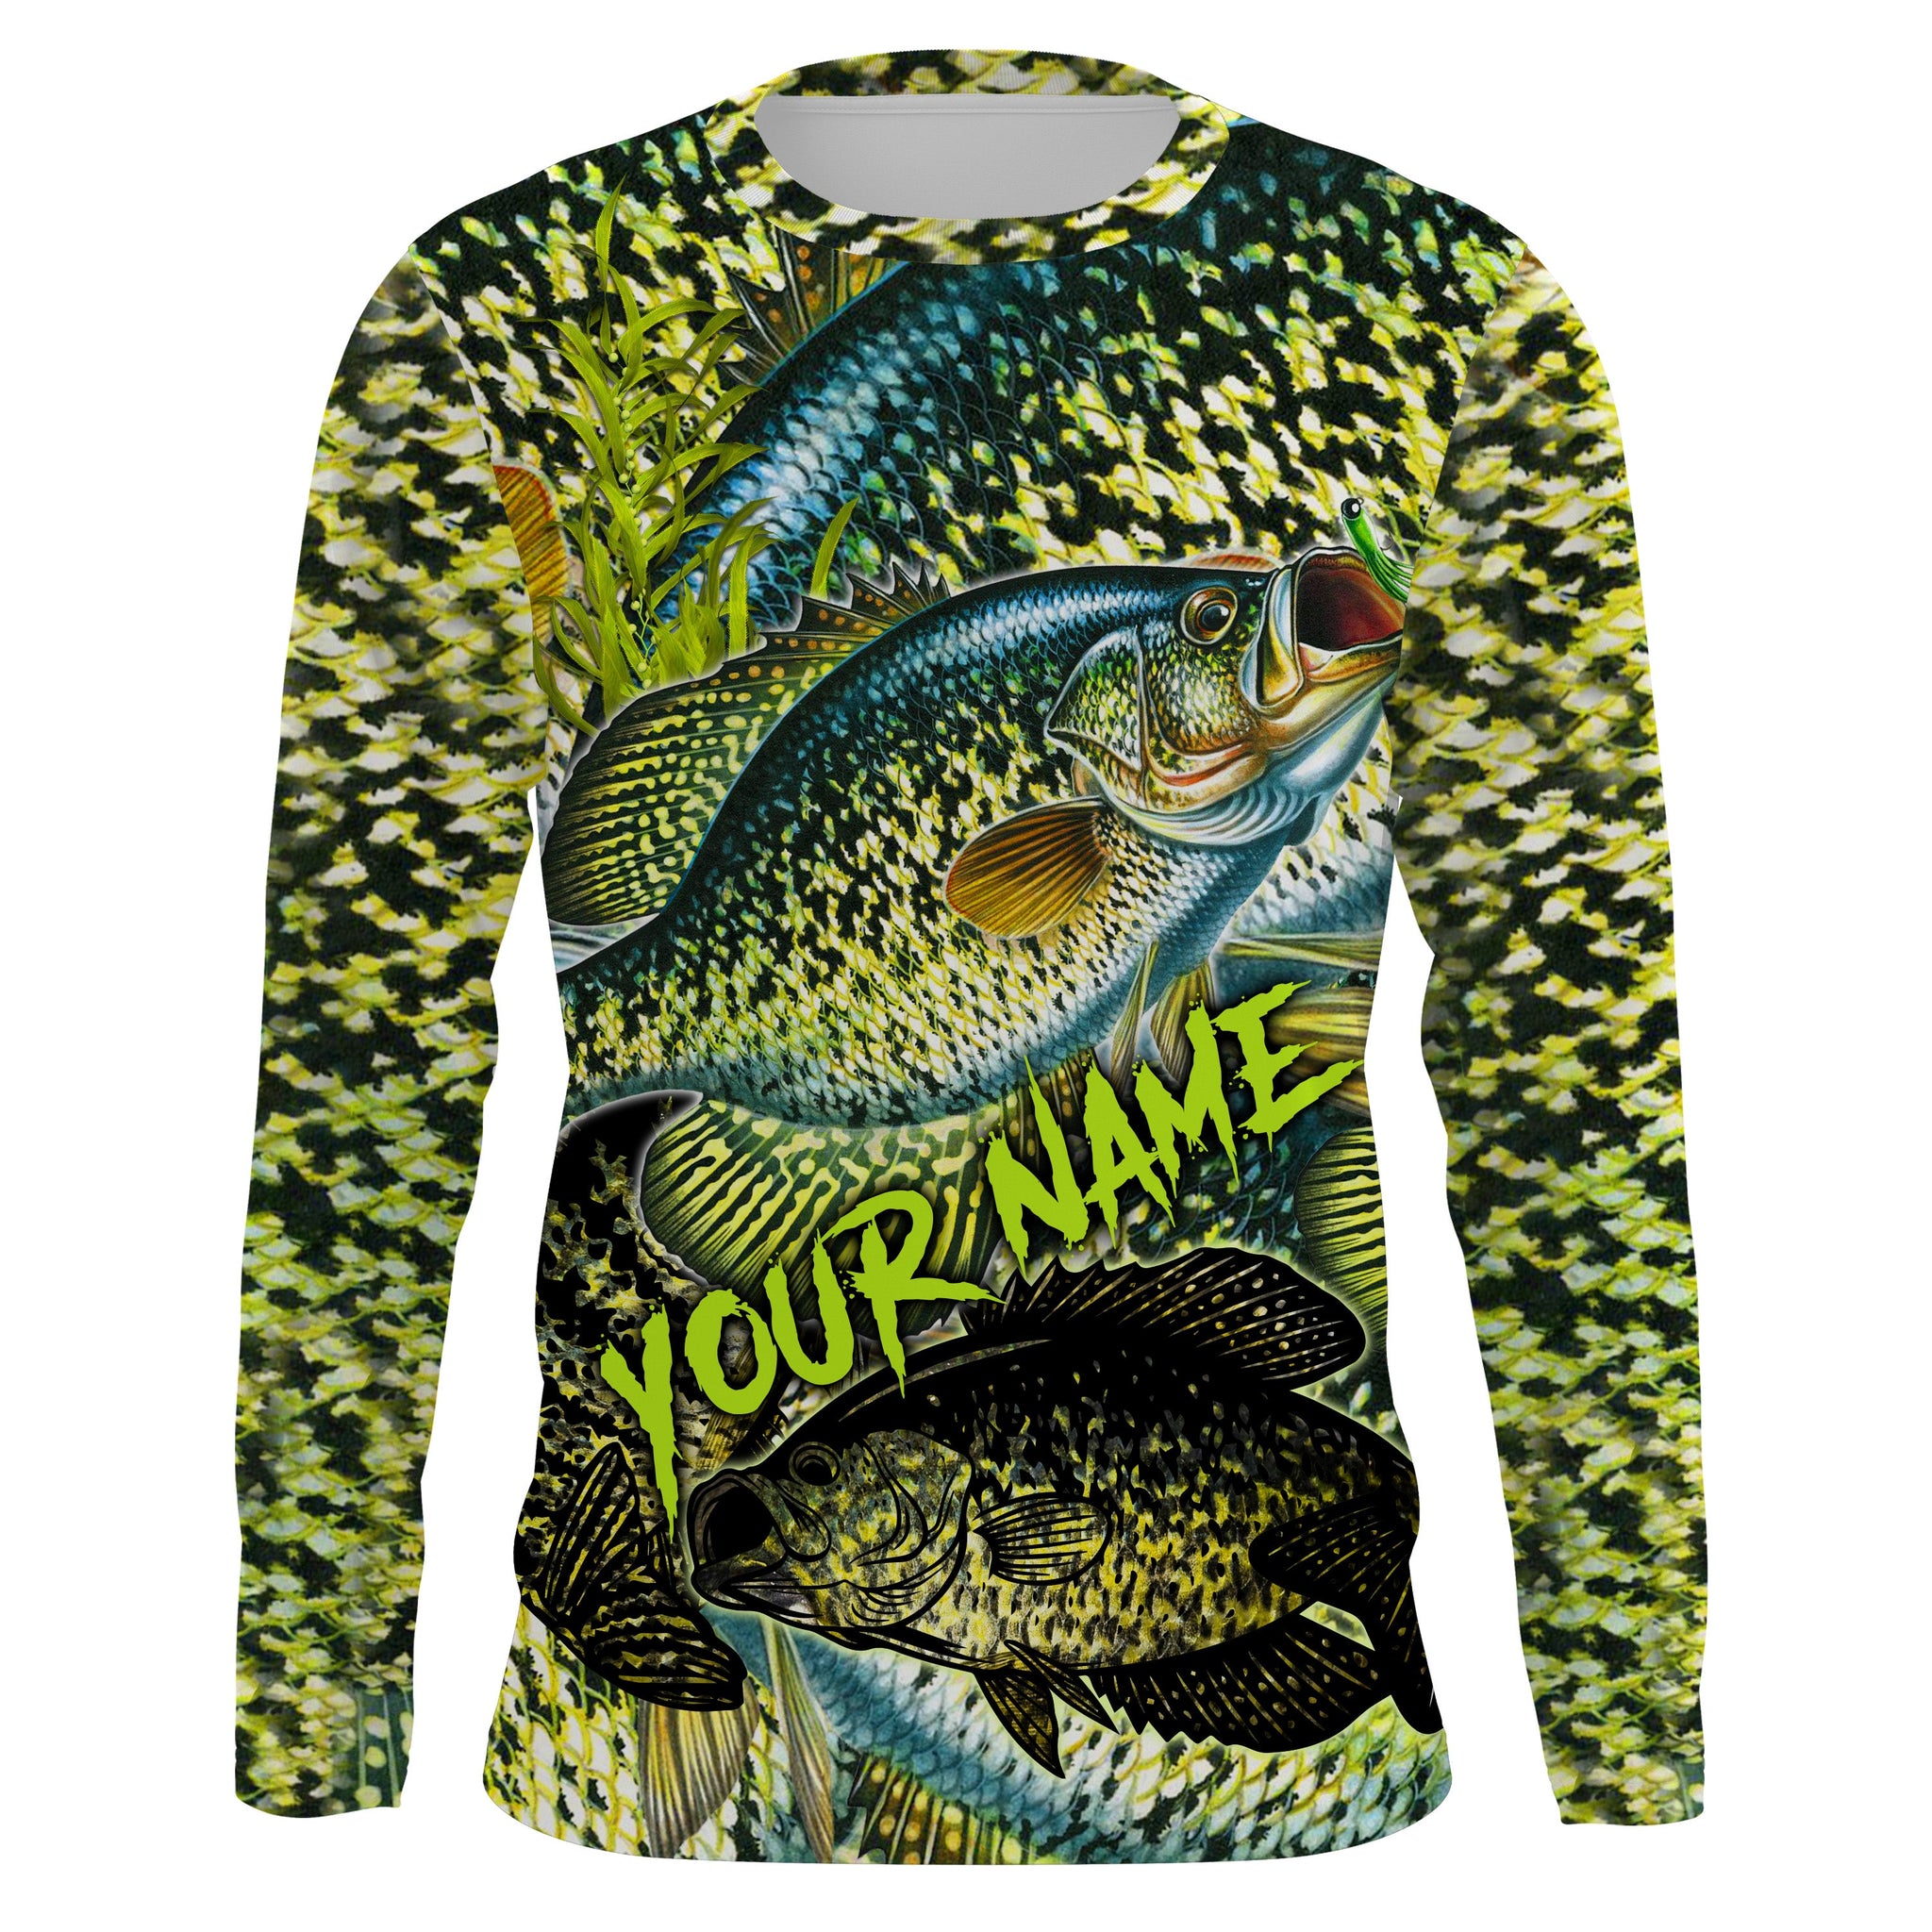 Personalized Crappie Fishing jerseys, Crappie green scales long sleeve fishing shirts uv protection NQS3654